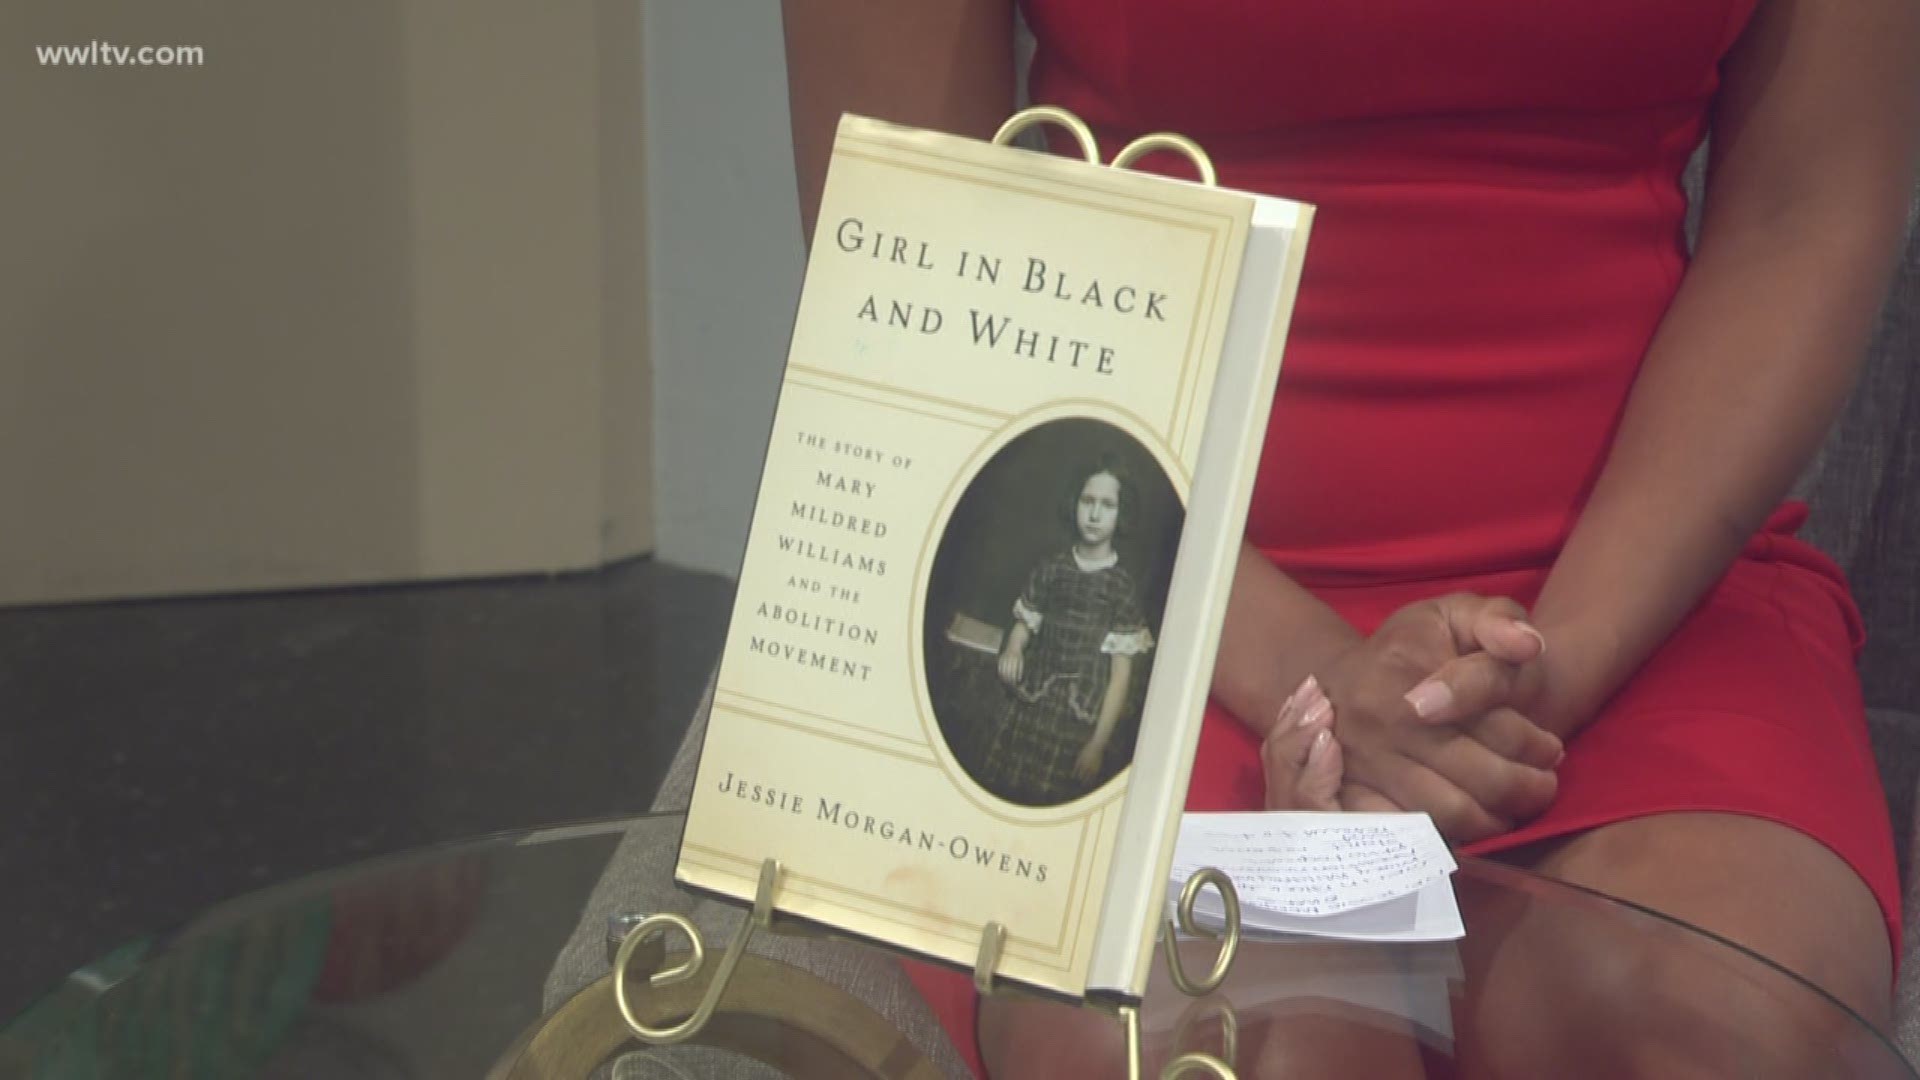 In this month's edition of Sheba's Shelf, we are learning more about a new memoir by Sarah Broom and the story of a late 1800s young slave girl who became the face of the abolitionist movement by Doctor Jessie Morgan Owens.